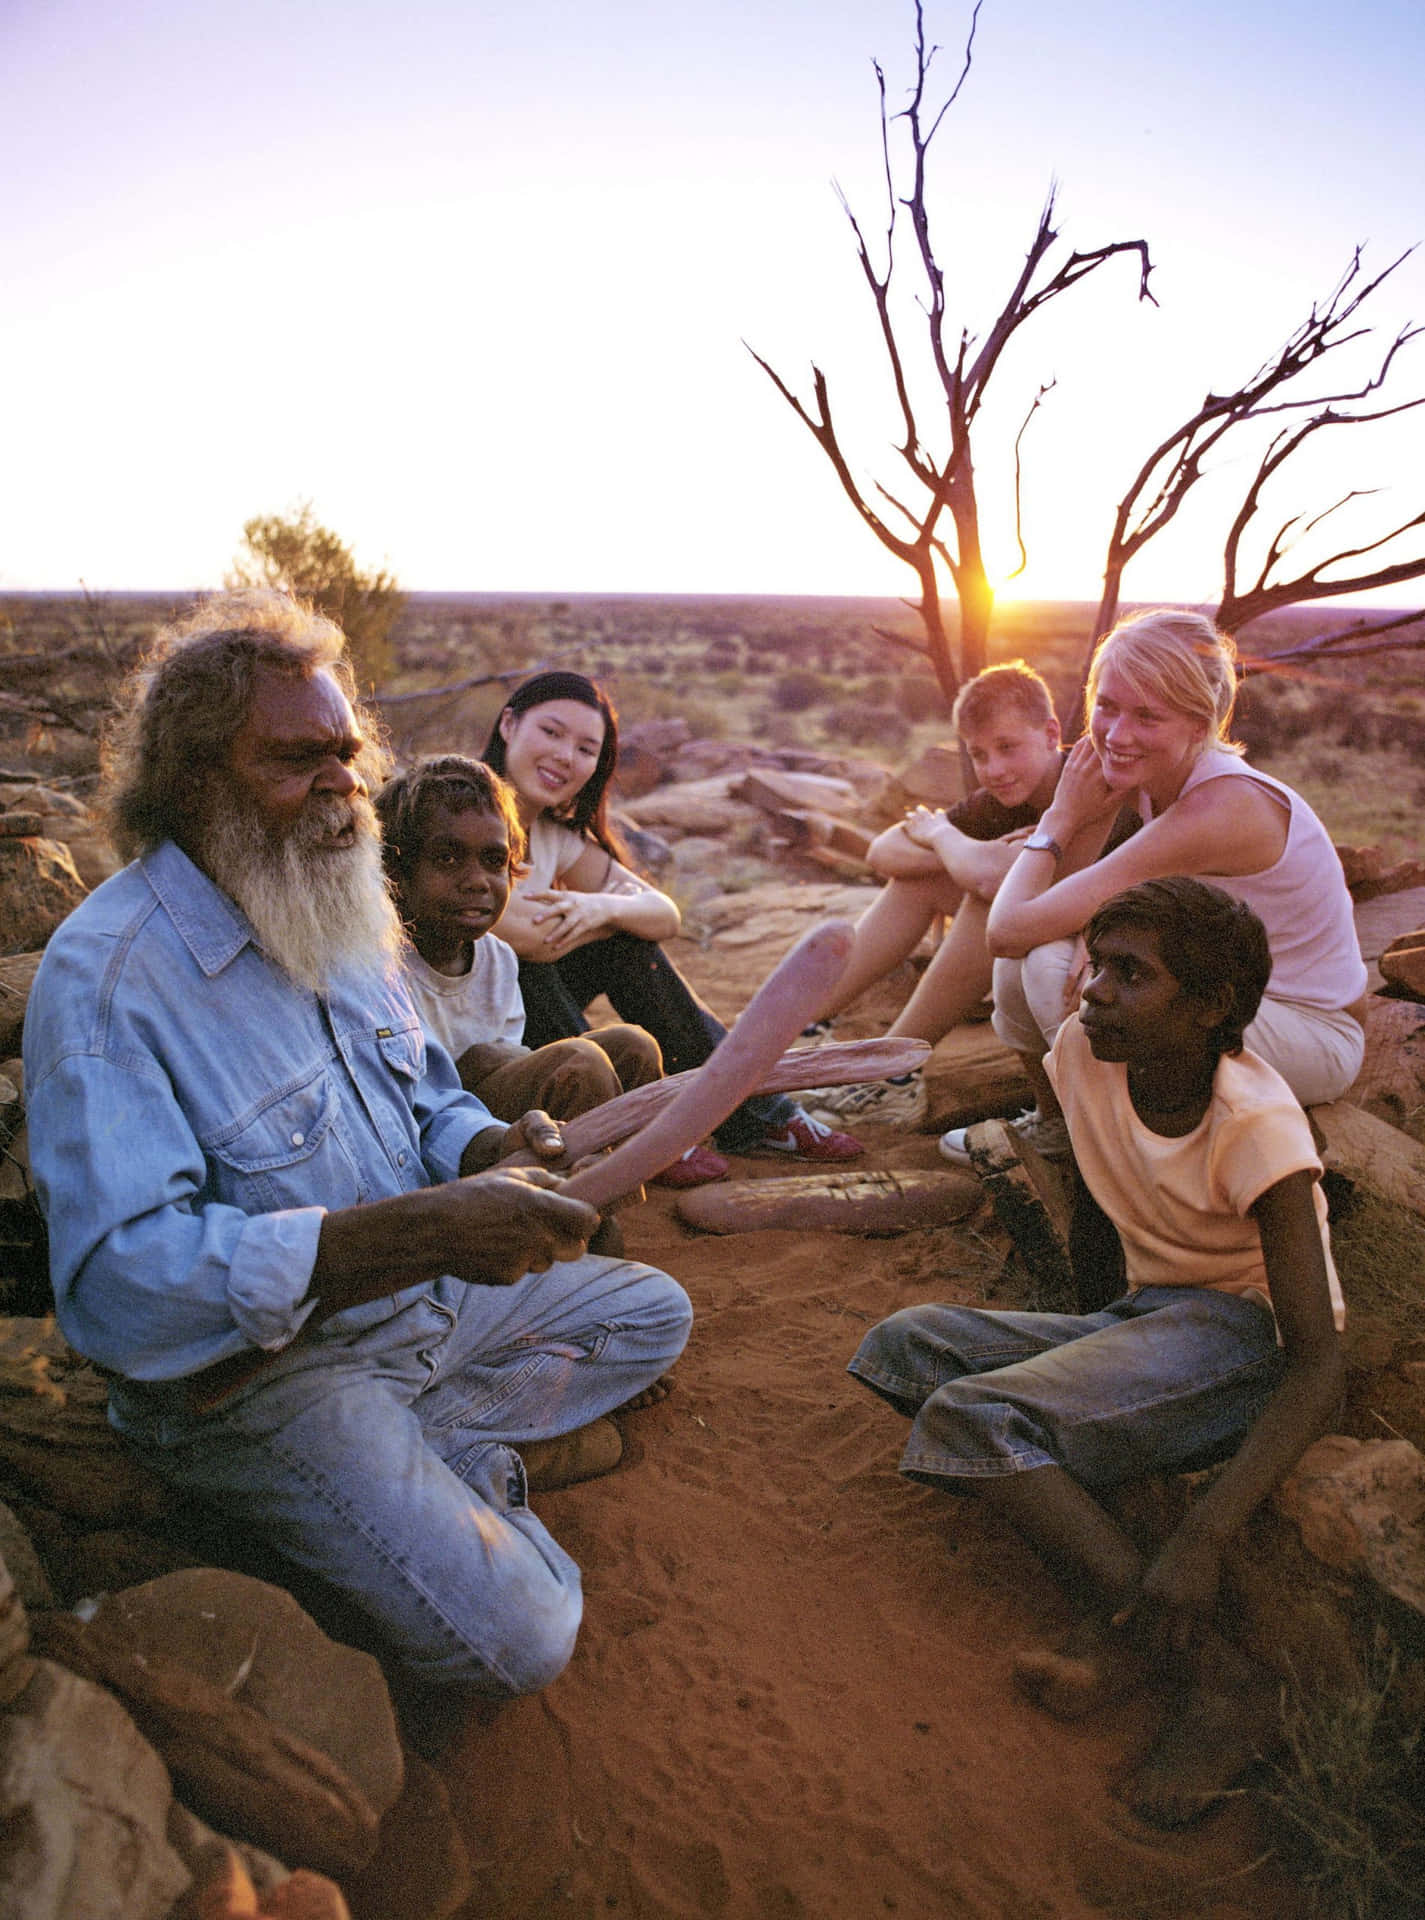 A Group Of People Sitting On The Ground